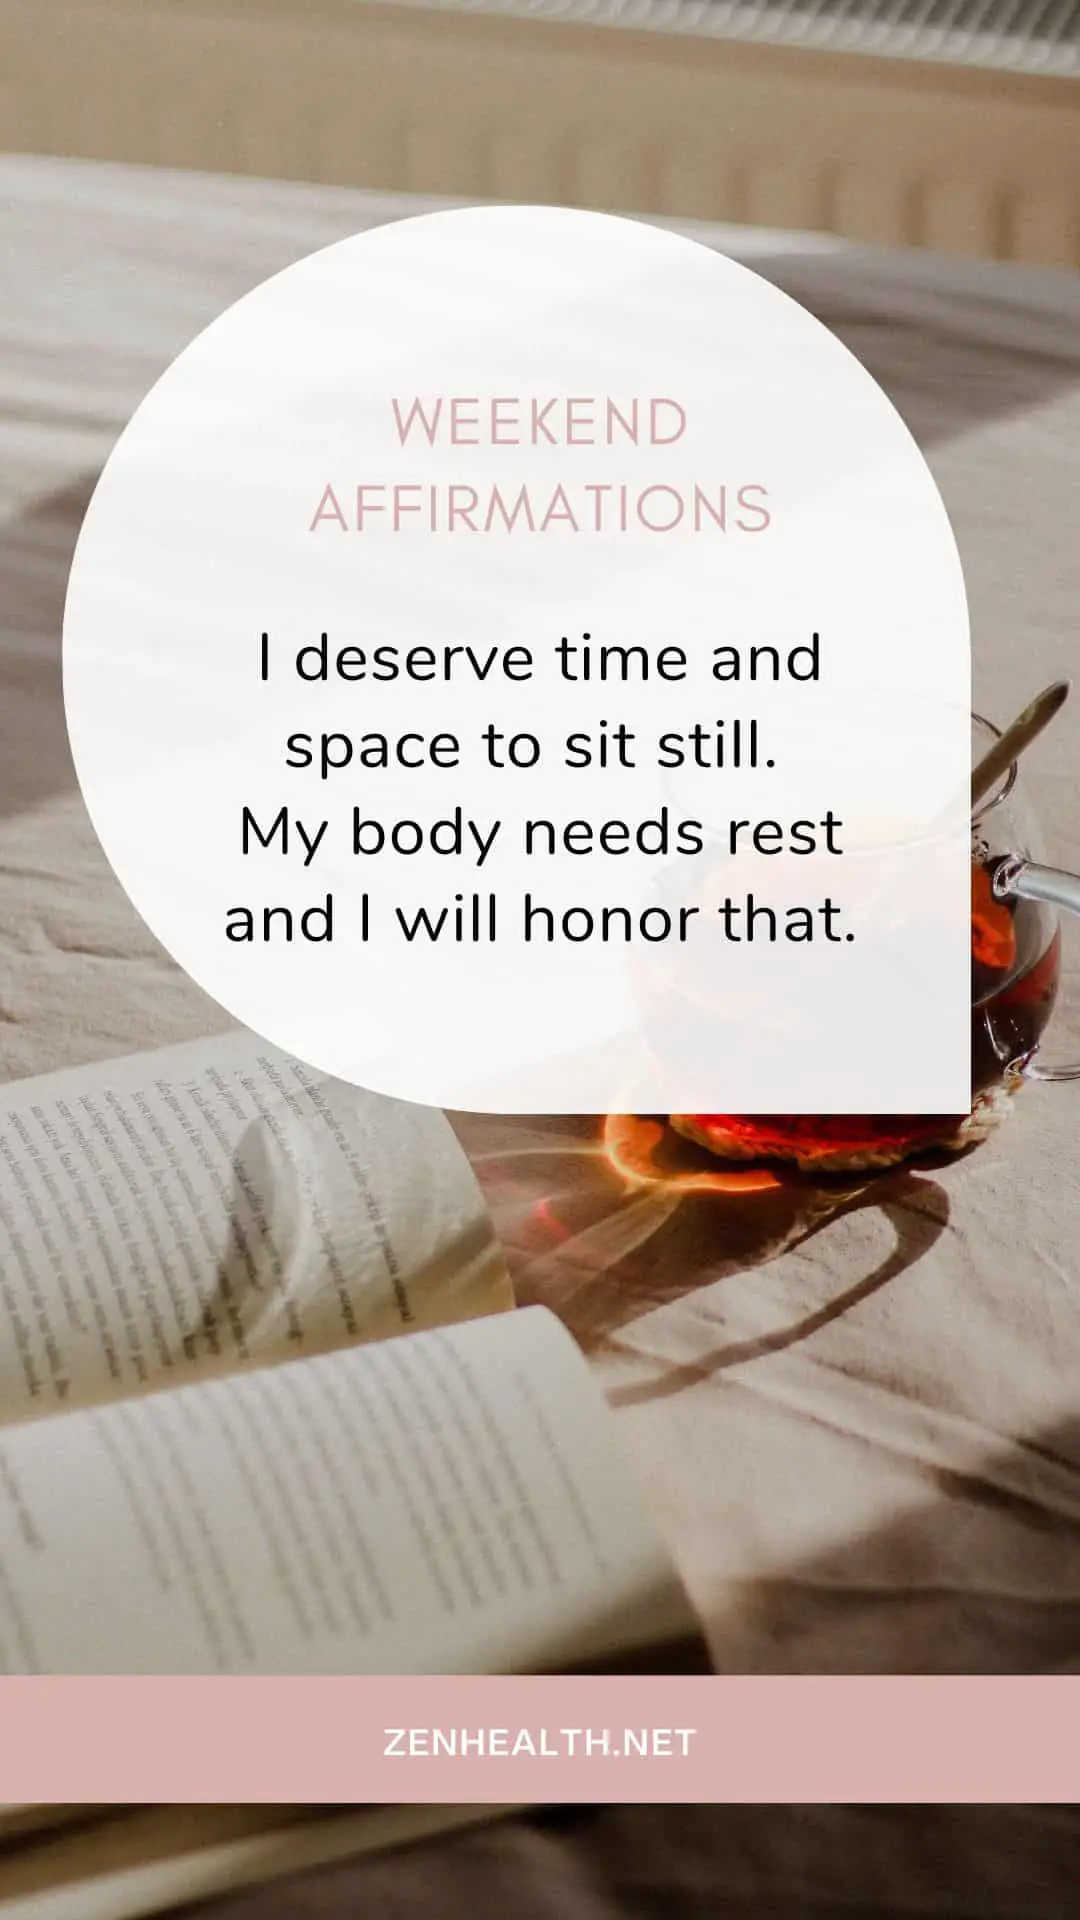 weekend affirmations: I deserve time and space to sit still. My body needs rest and I will honor that